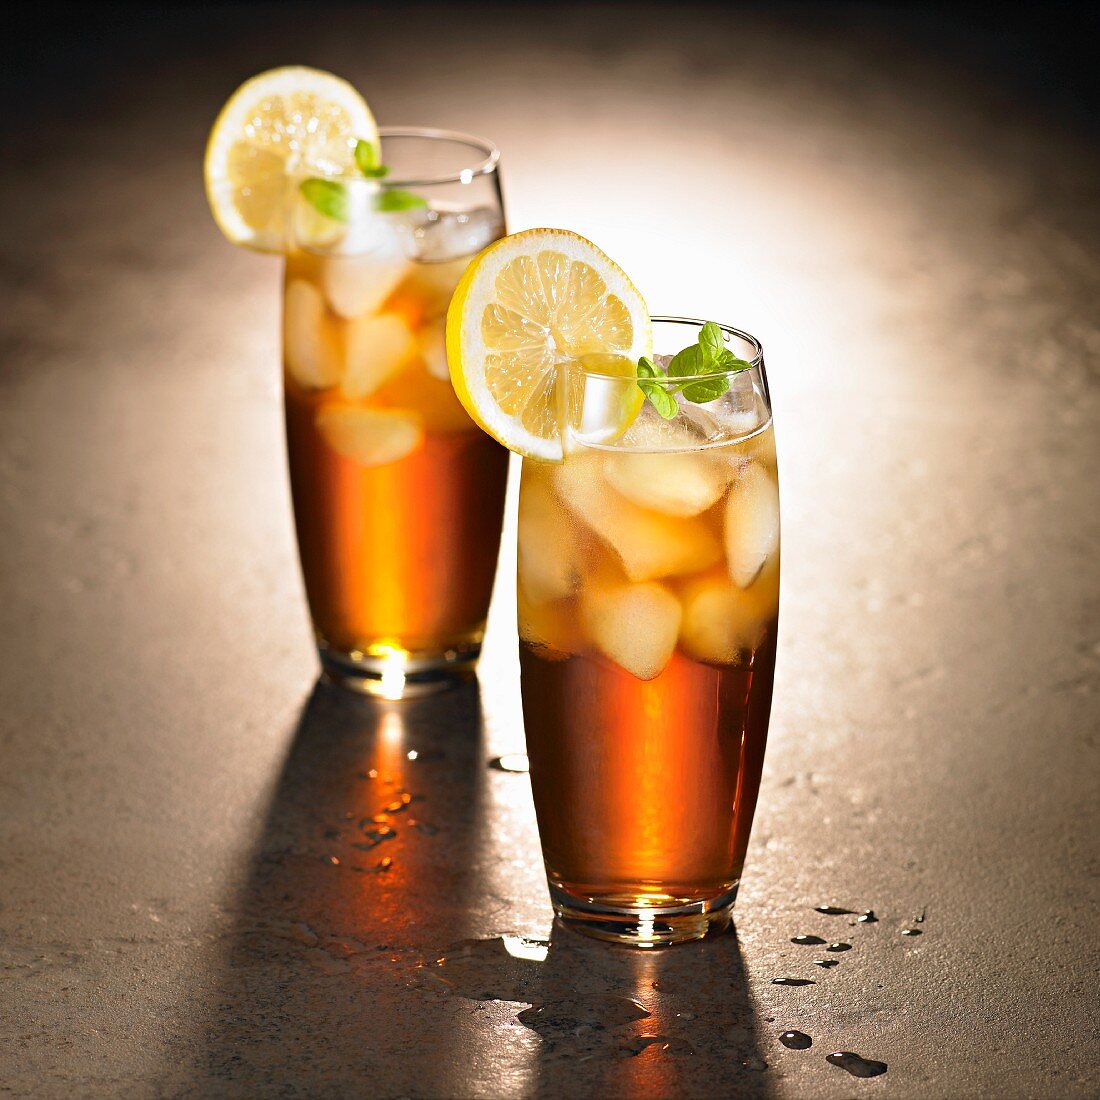 Rum and cola with ice cubes and lemons